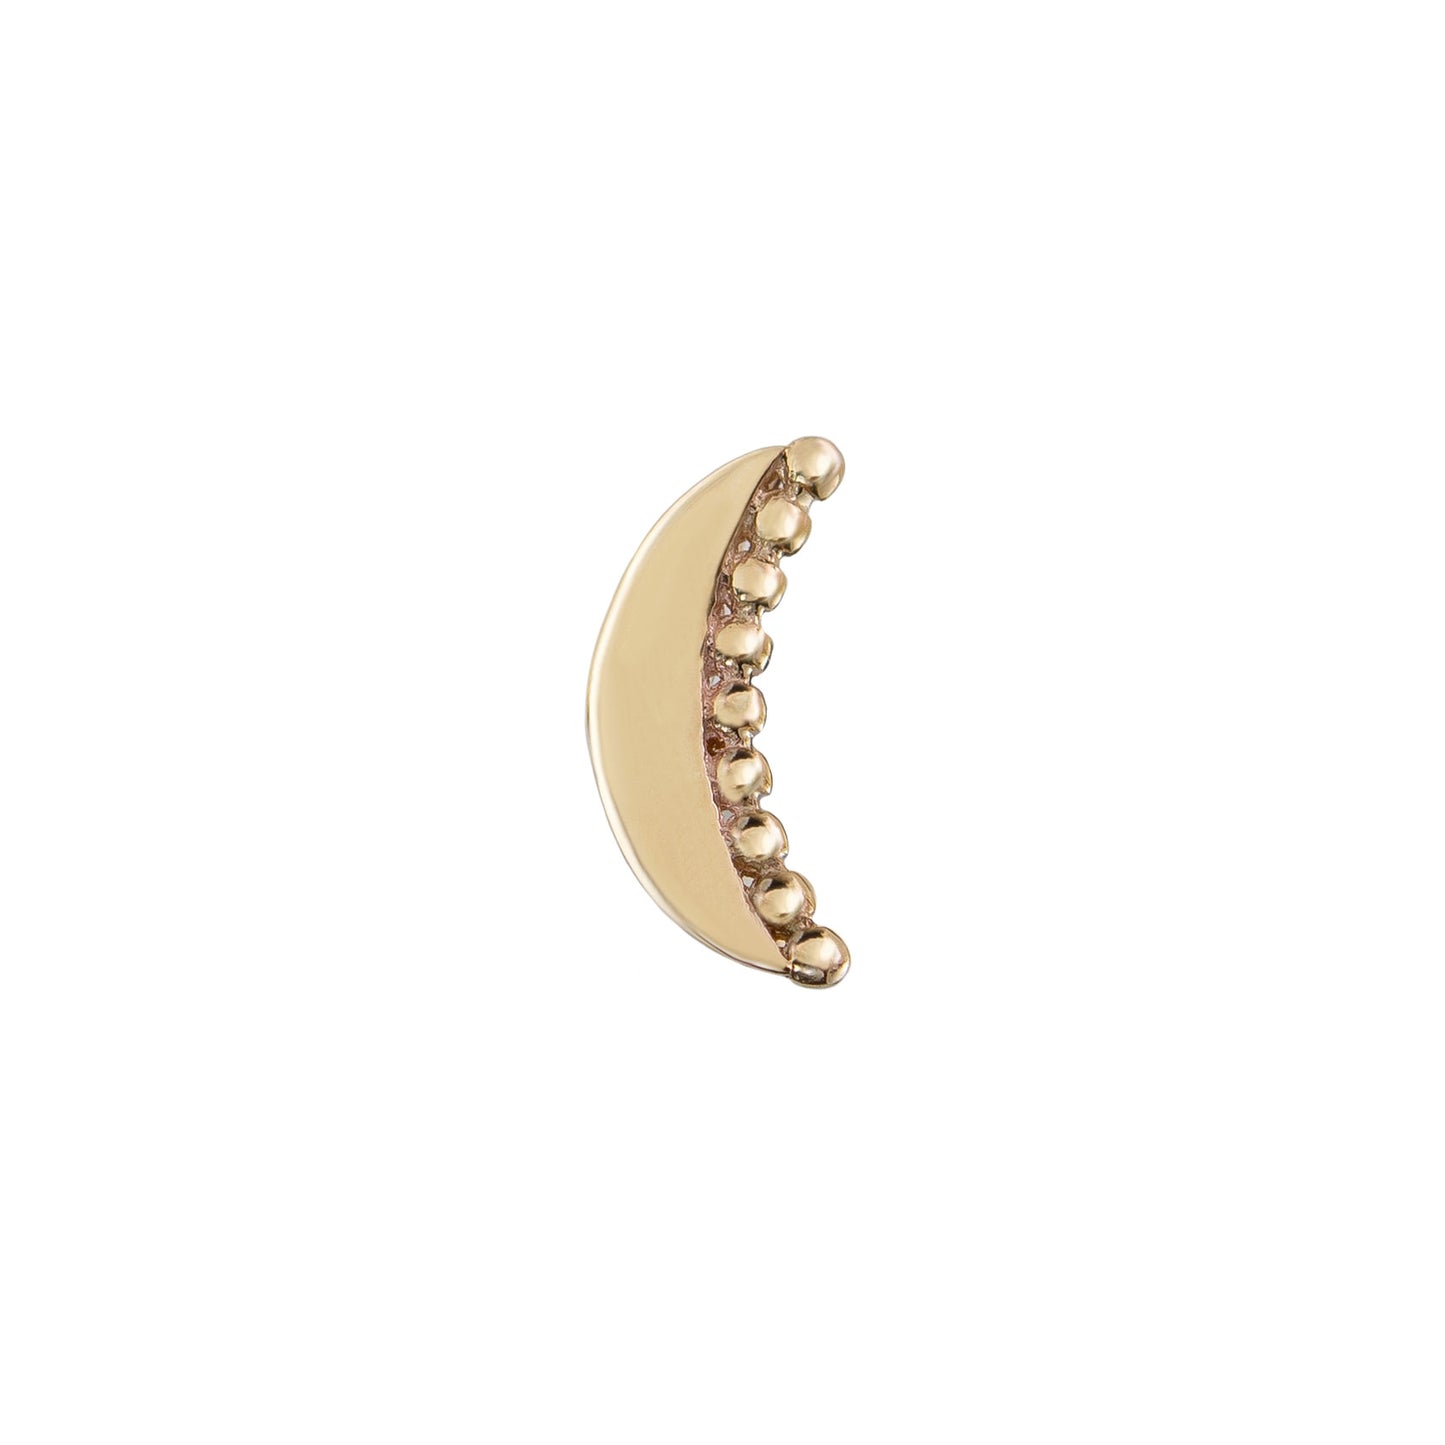 a crescent moon shaped gold stud with round gold accents on a white background